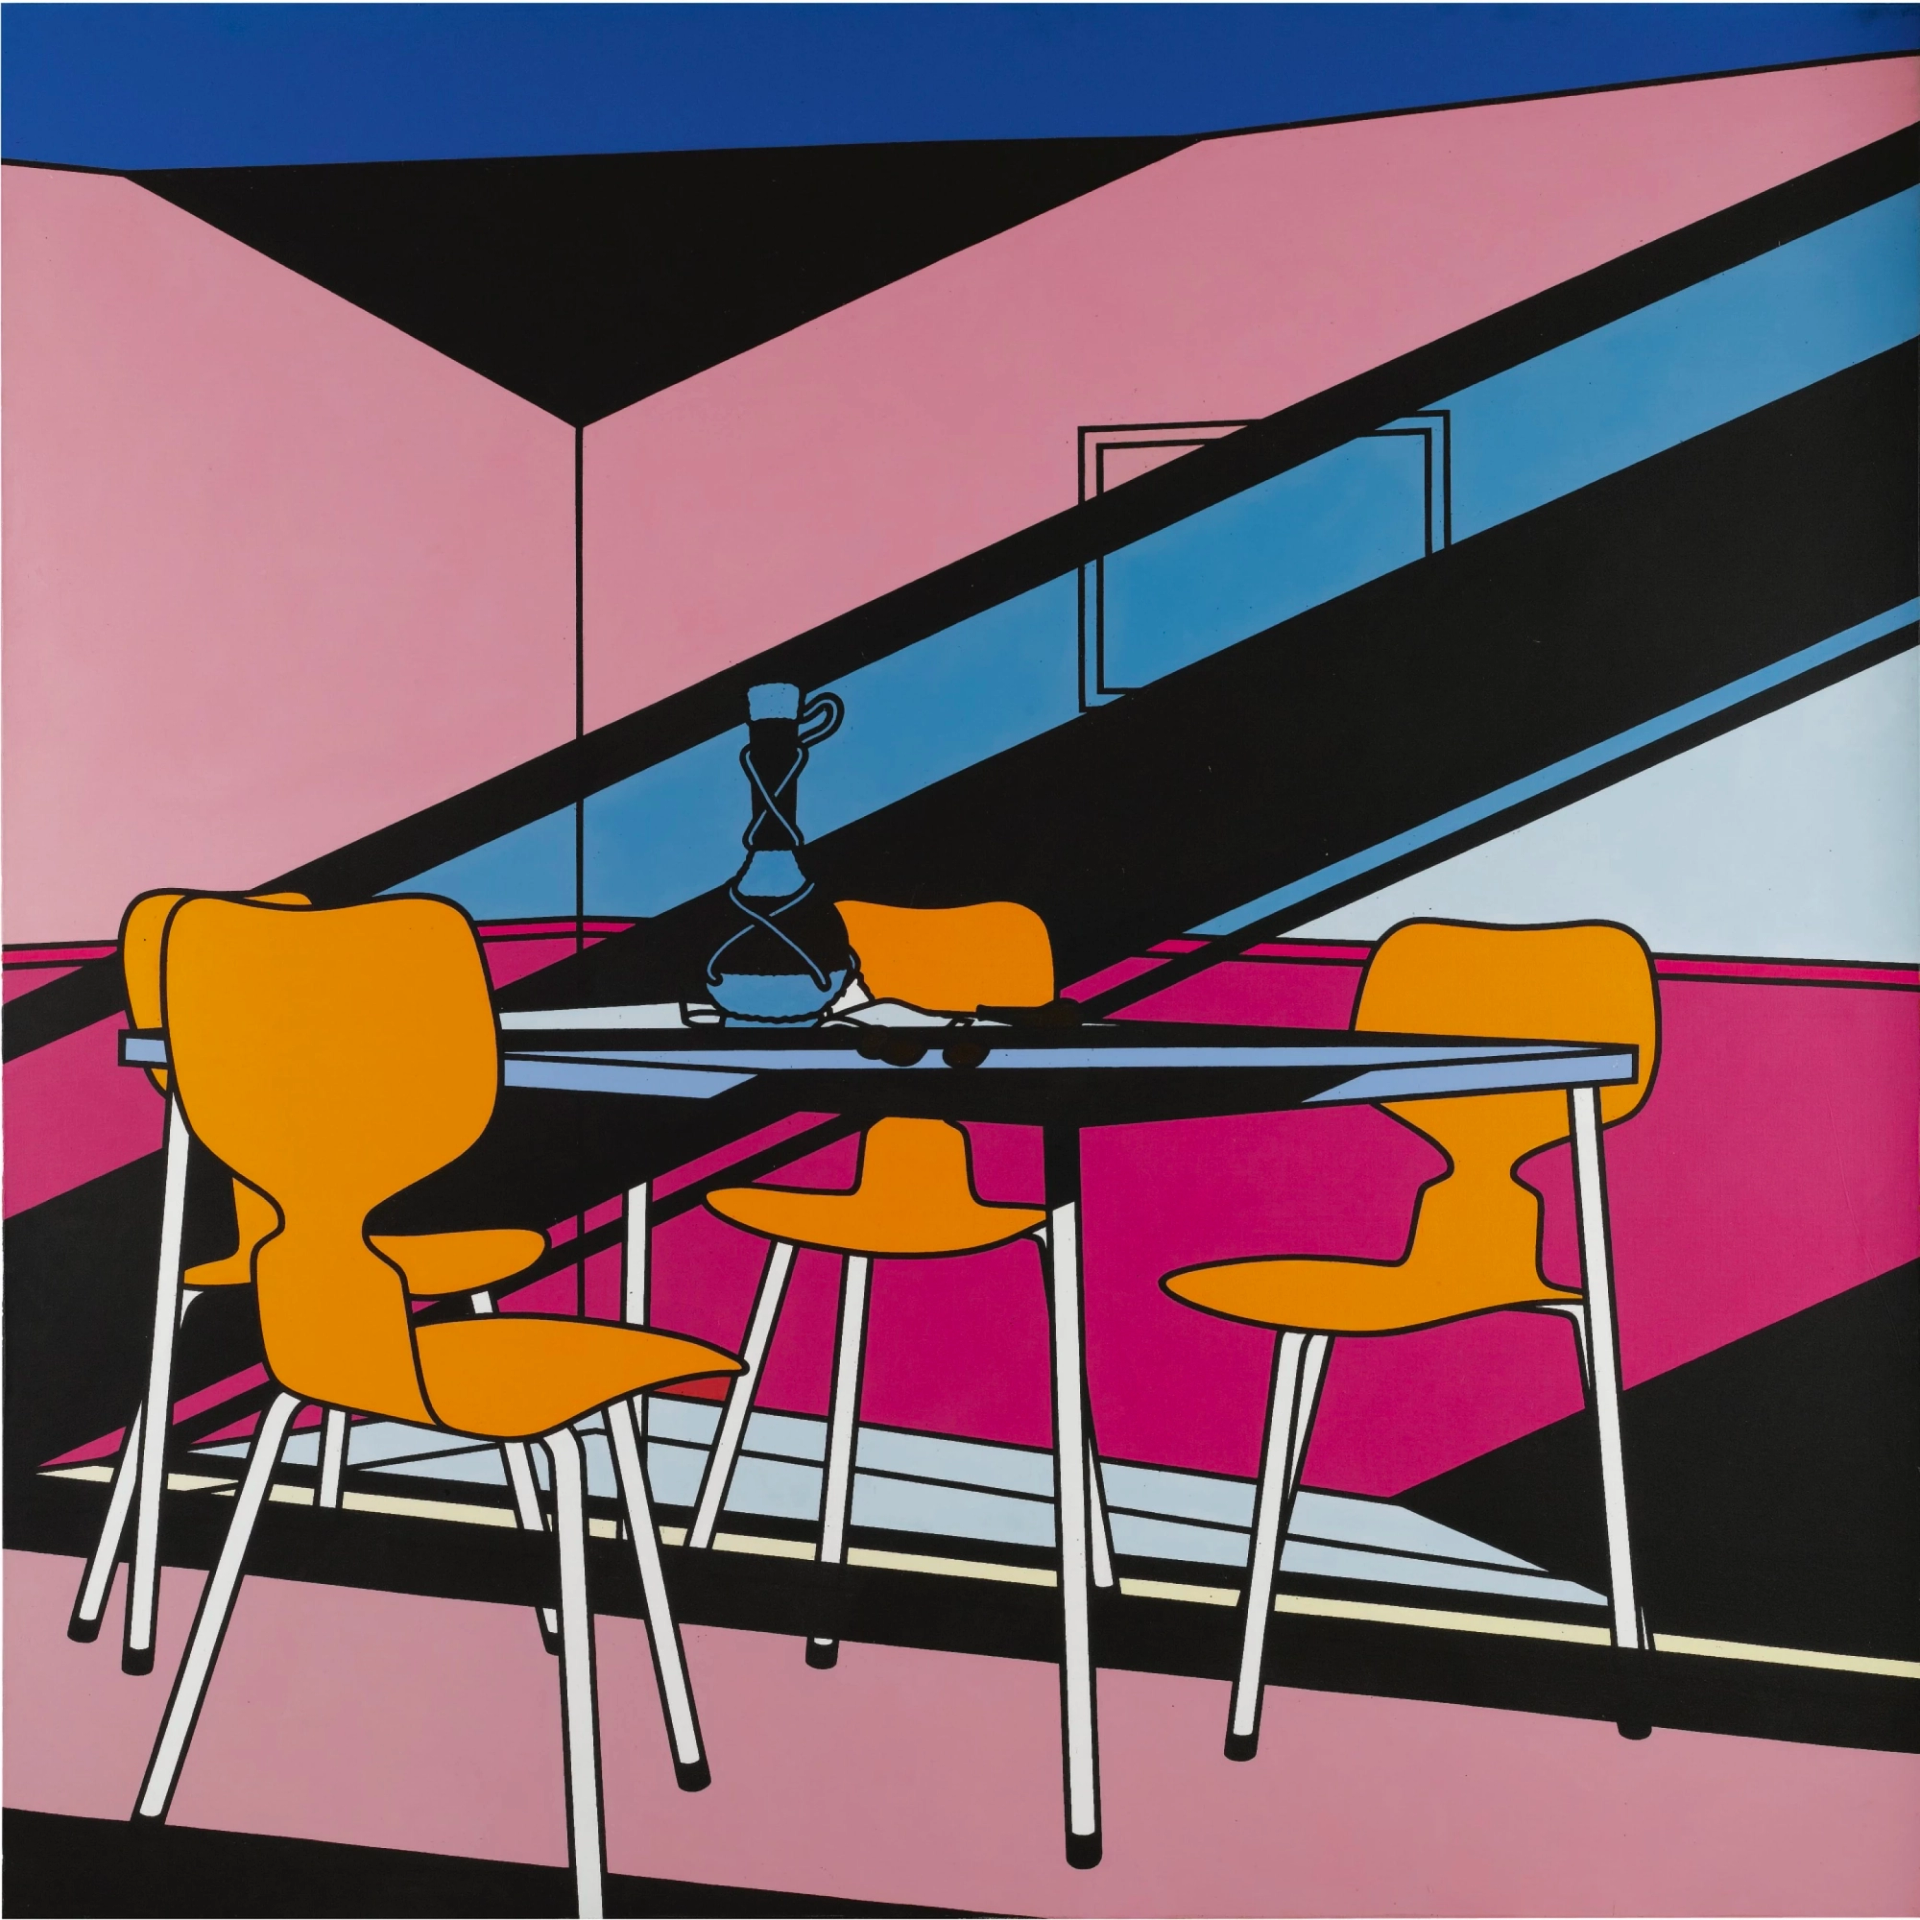 The image displays the vibrant interior of a cafe, with bold hues of pink, magenta, orange, and blues. In the background, there is an escalator, while the foreground features an unoccupied table with four chairs.